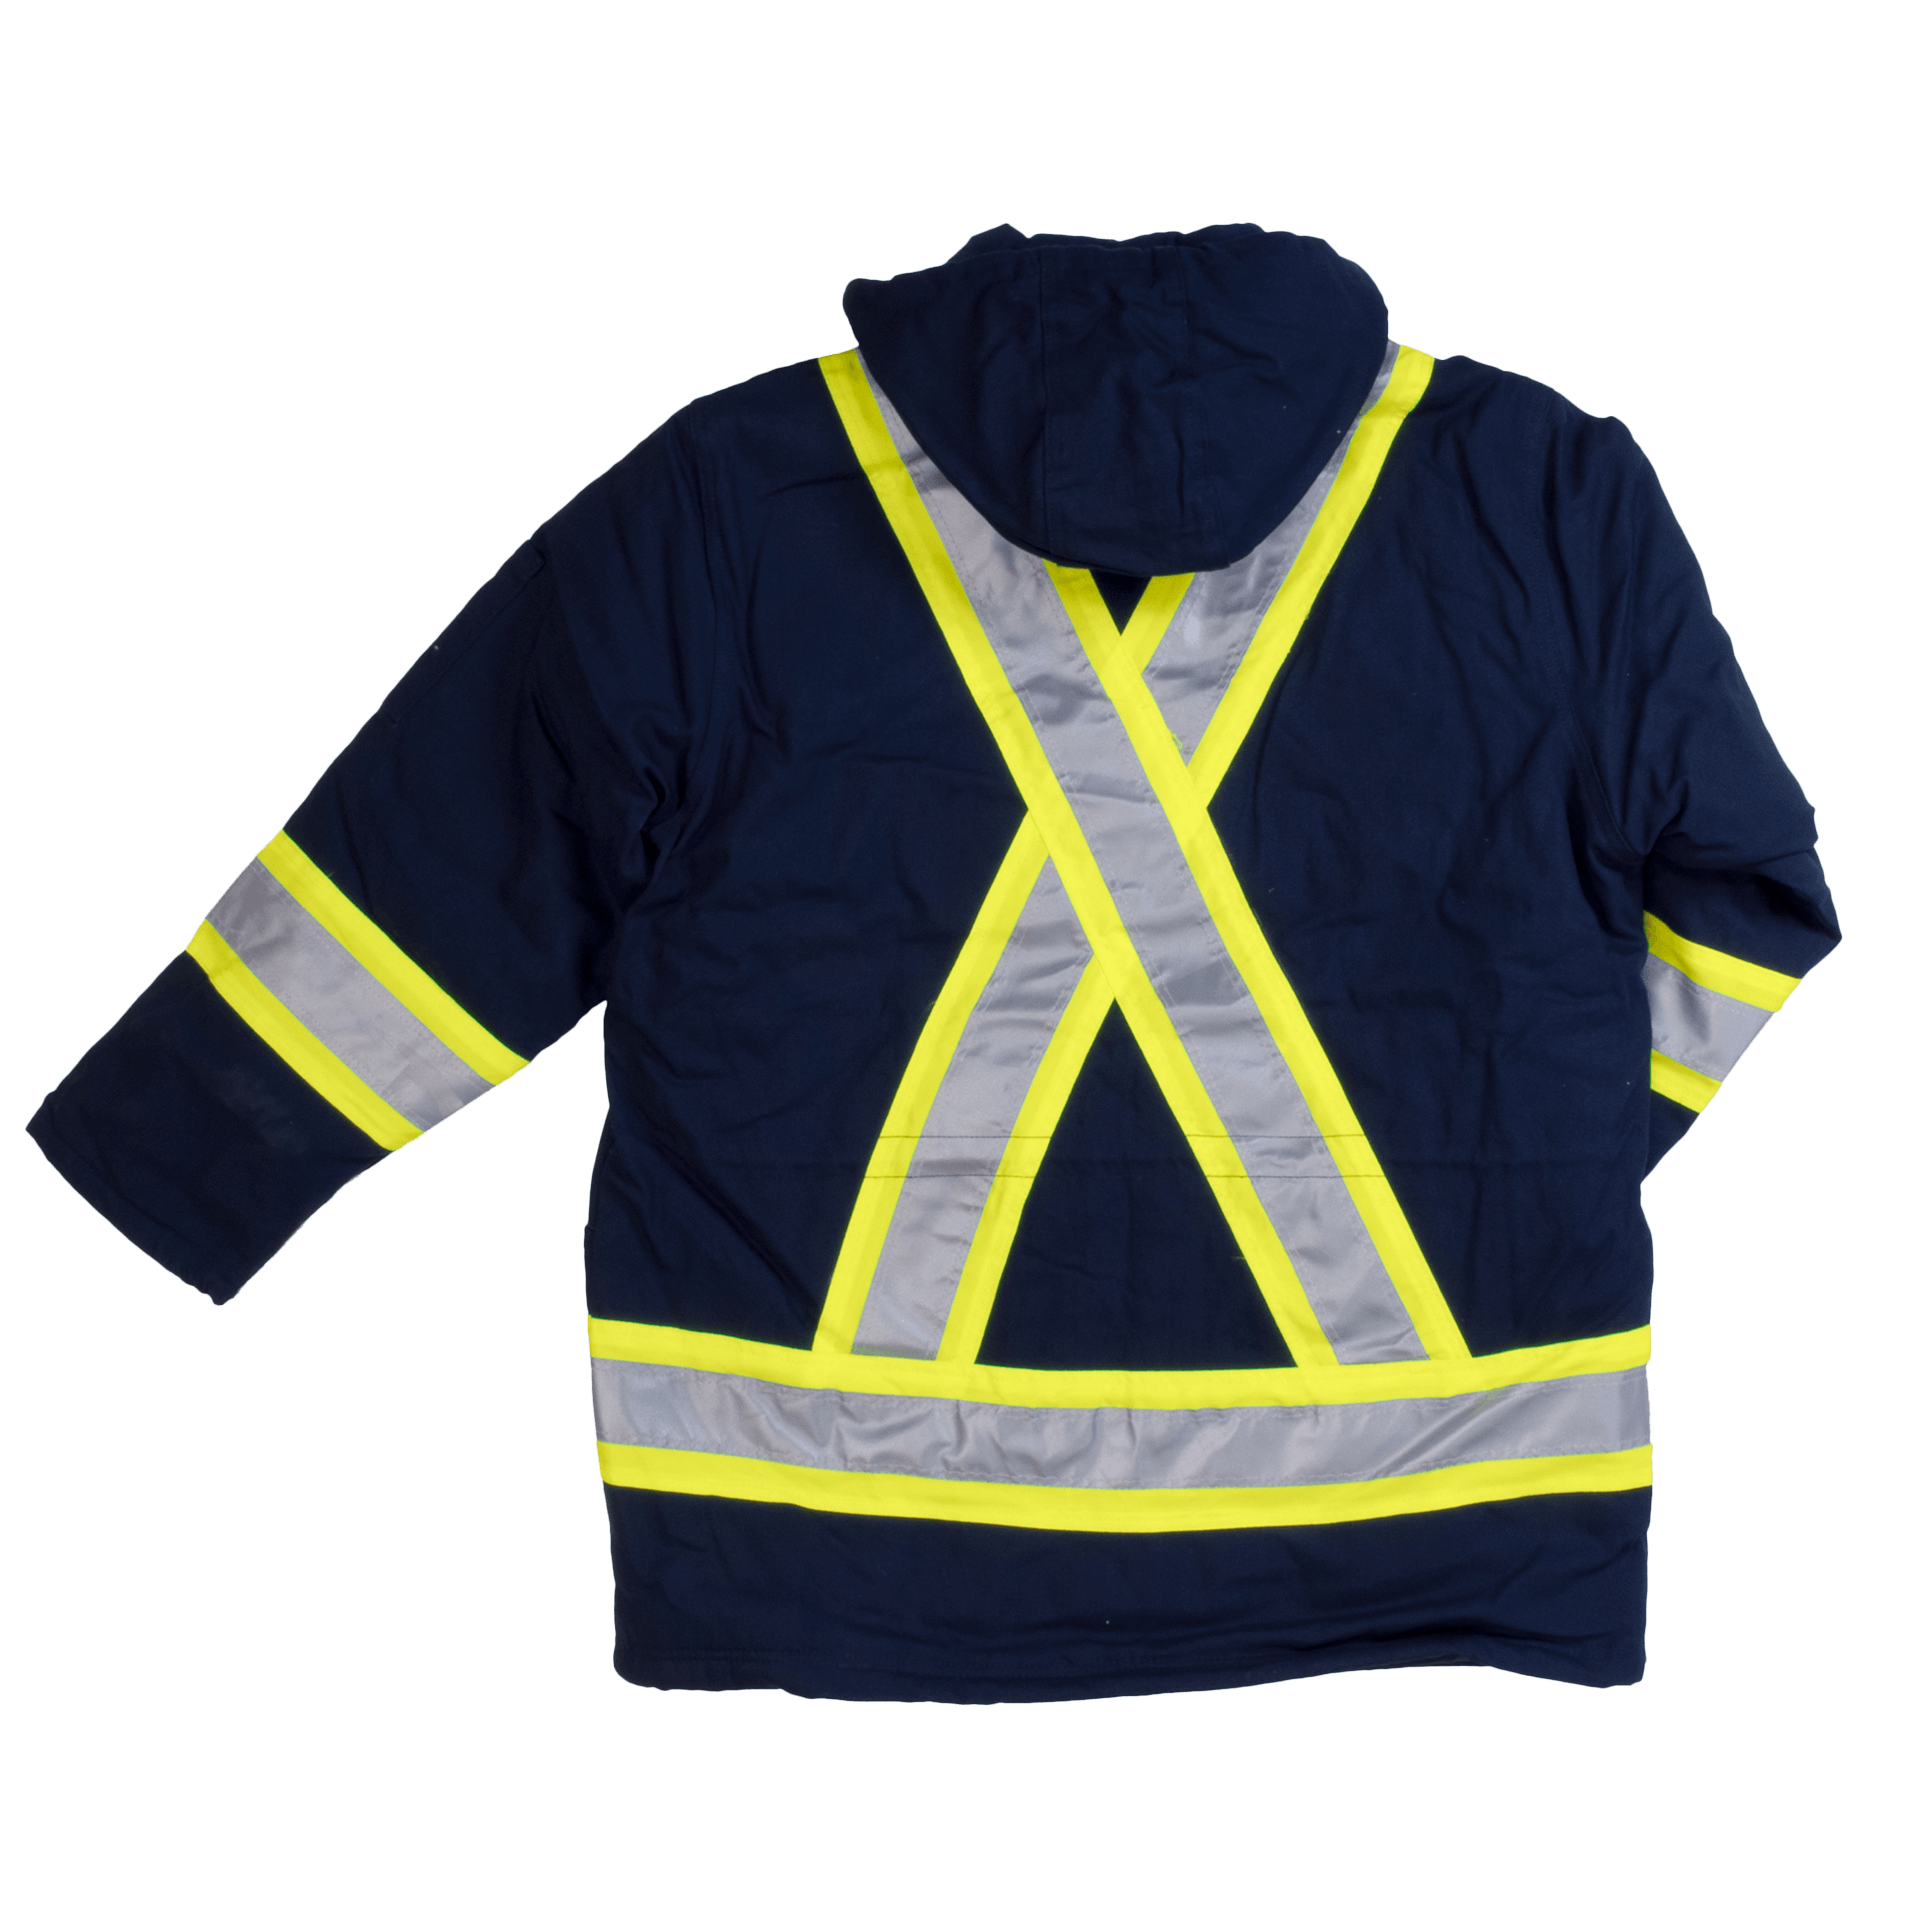 Tough Duck Fleece Lined Safety Jacket - S157 - Navy - back